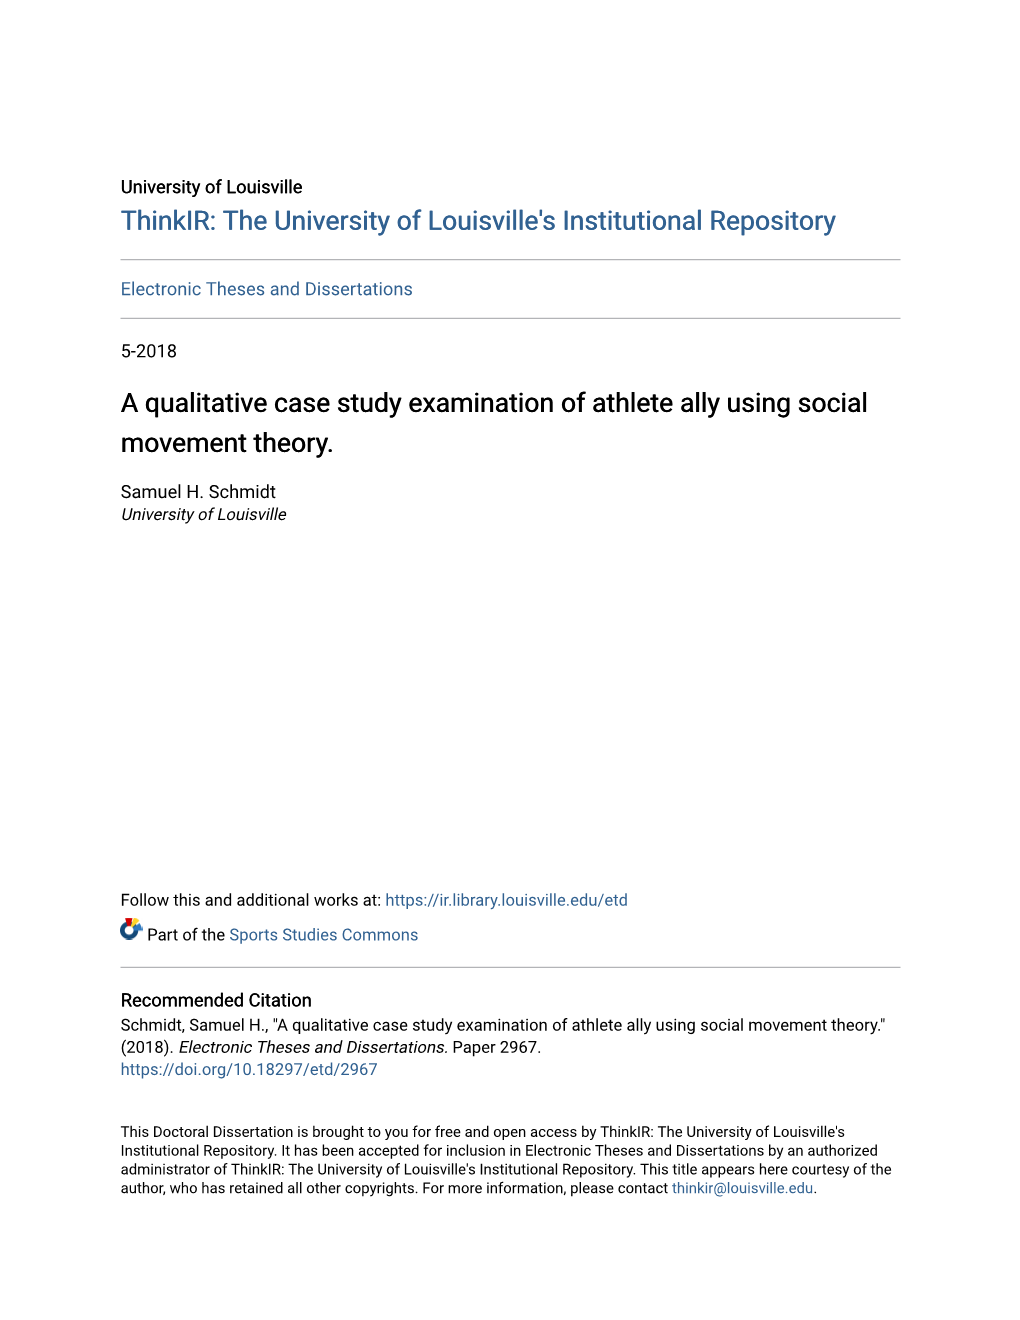 A Qualitative Case Study Examination of Athlete Ally Using Social Movement Theory